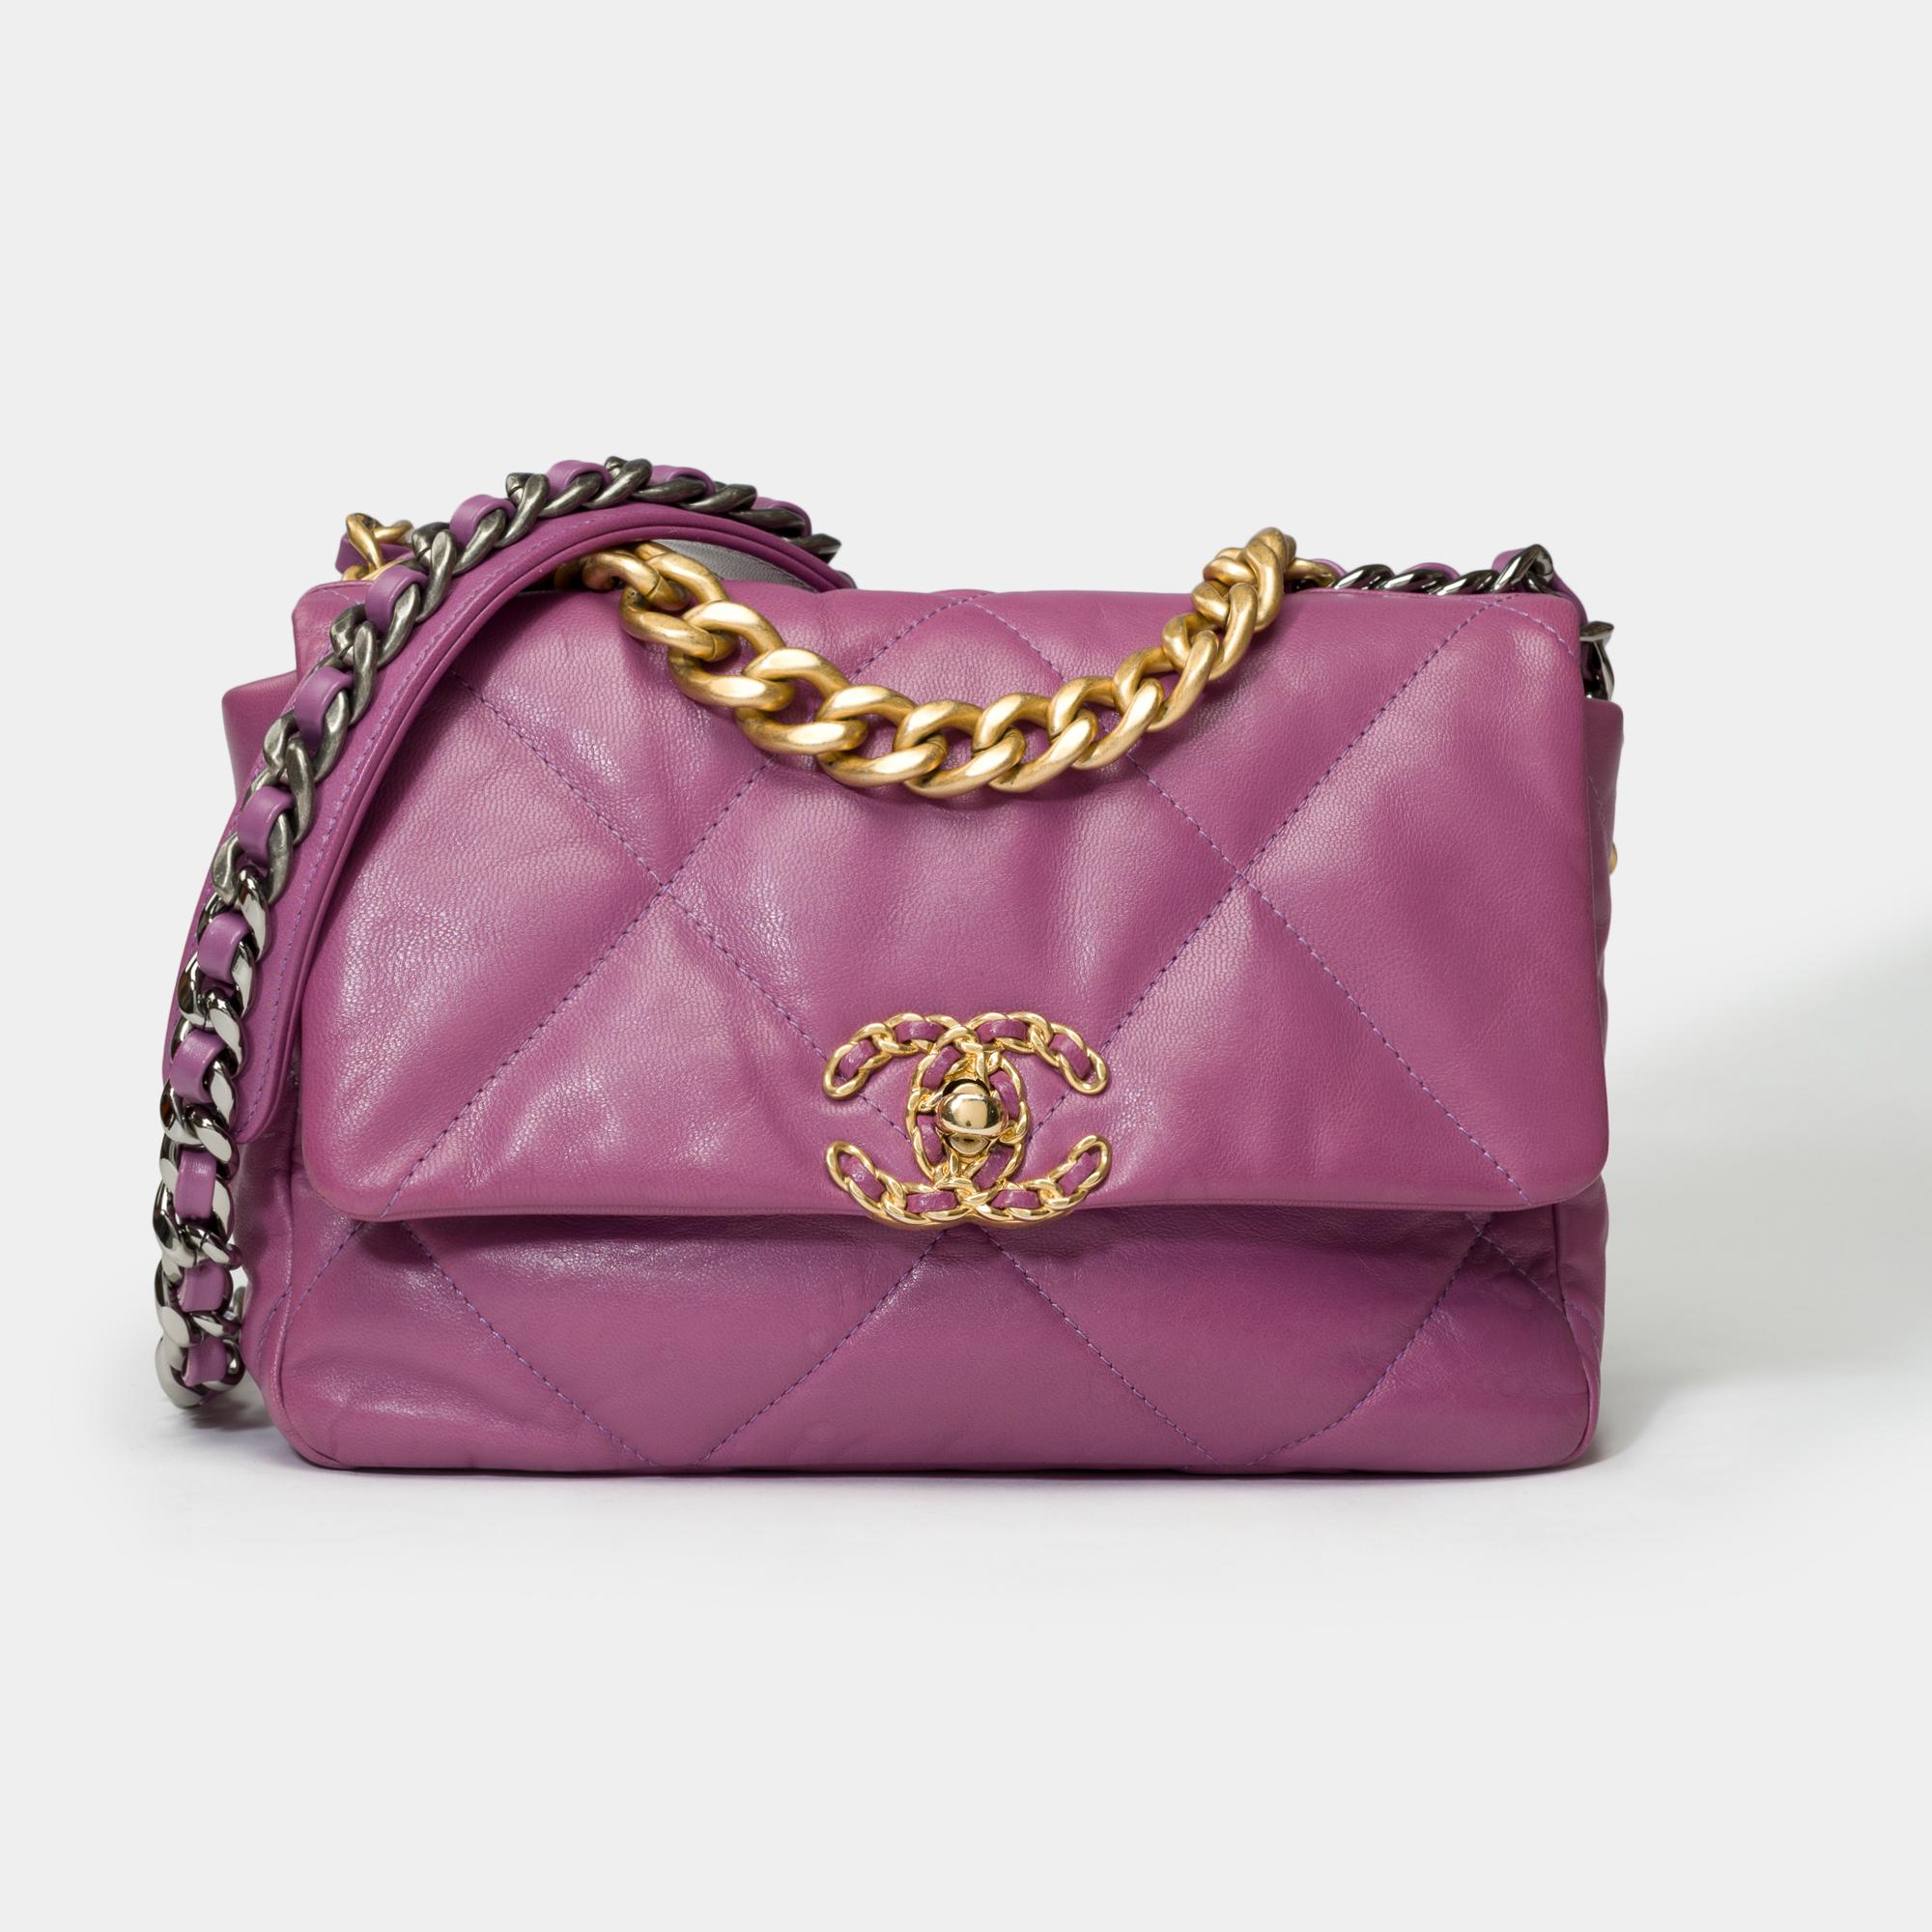 Sublime​ ​Chanel​ ​19​ ​shoulder​ ​bag​ ​in​ ​purple​ ​quilted​ ​leather,​ ​gold​ ​and​ ​silver​ ​metal​ ​trim,​ ​handle​ ​in​ ​aged​ ​gold​ ​metal,​ ​a​ ​chain​ ​handle​ ​in​ ​gold​ ​and​ ​silver​ ​metal​ ​interlaced​ ​with​ ​purple​ ​leather​